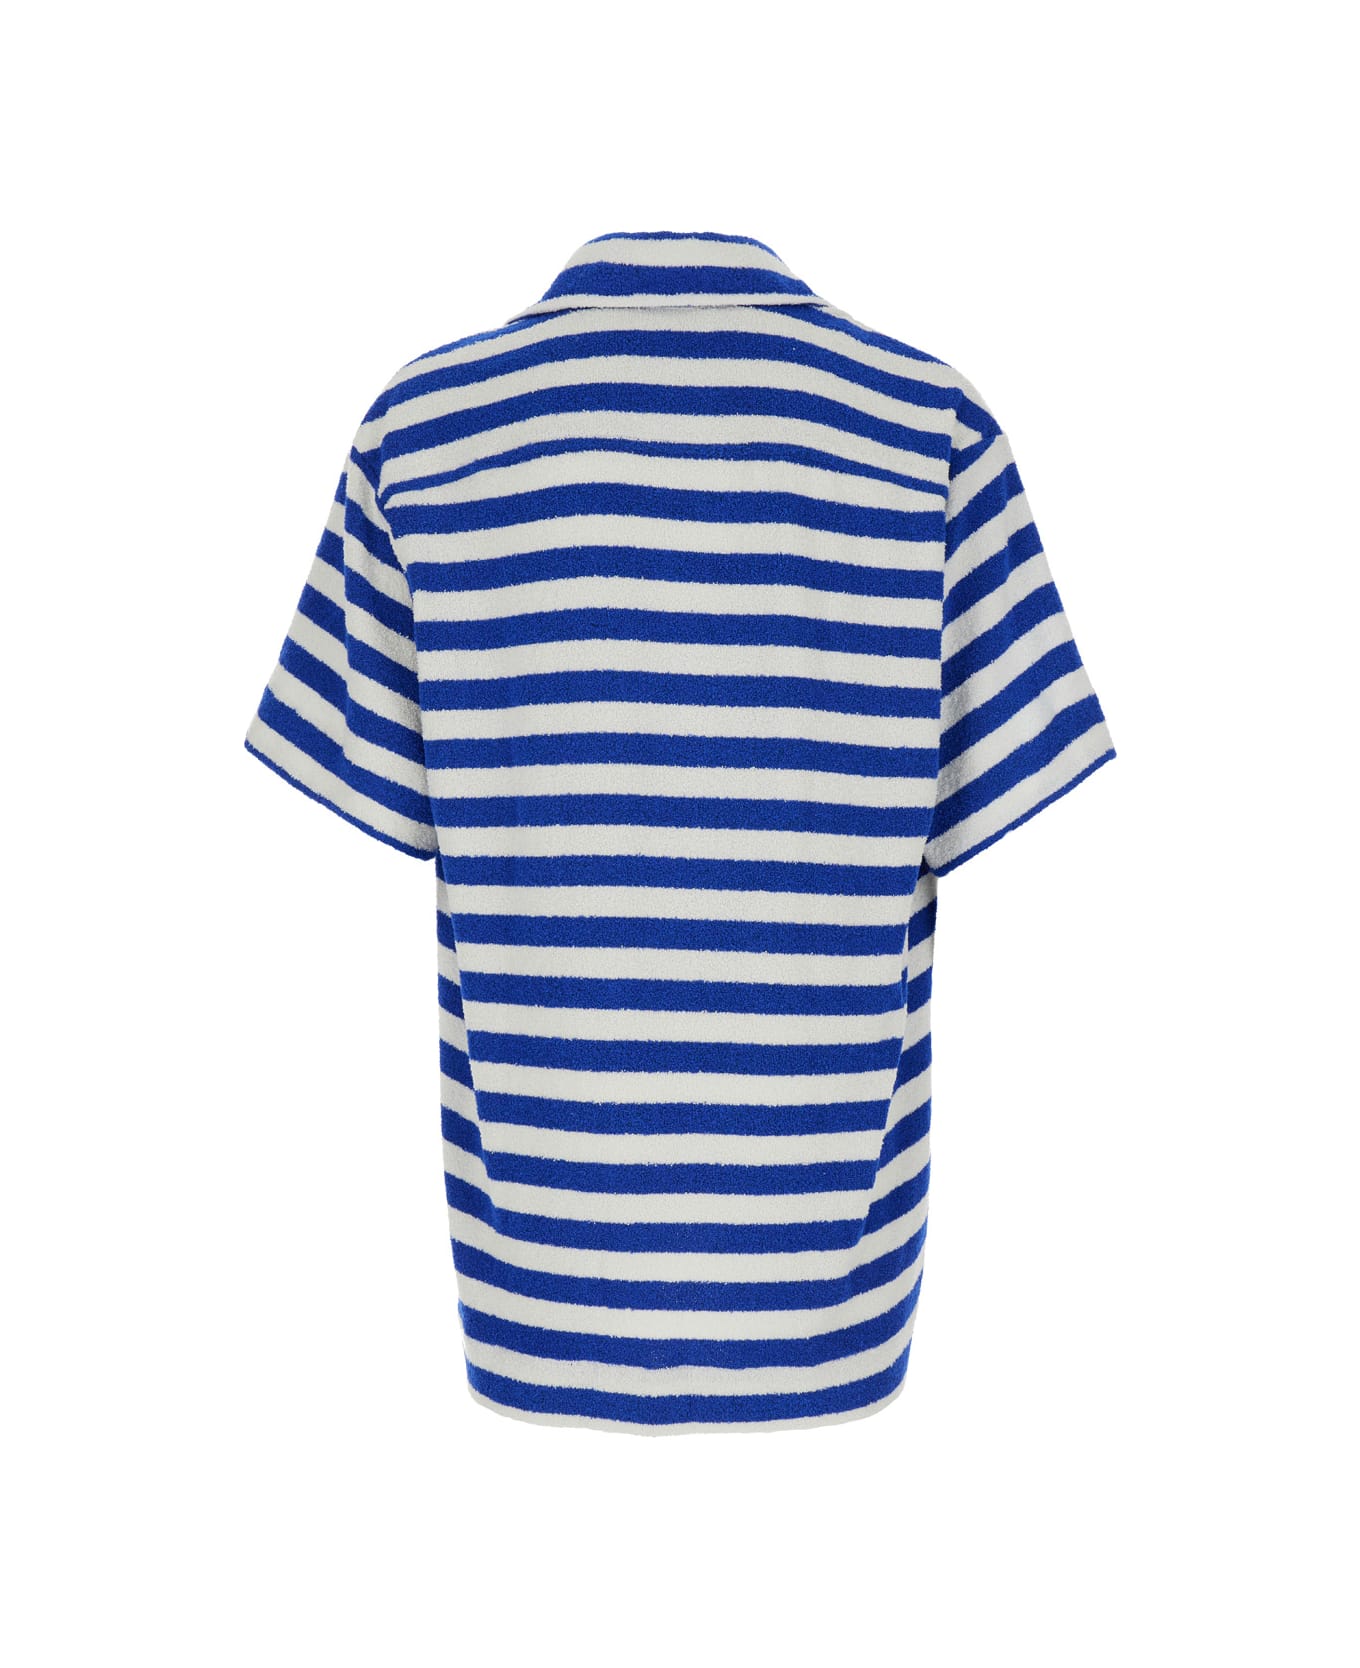 Vivienne Westwood Blue And White Striped Bowling Shirt With Orb Embroidery In Cotton Blend Man - WHITE